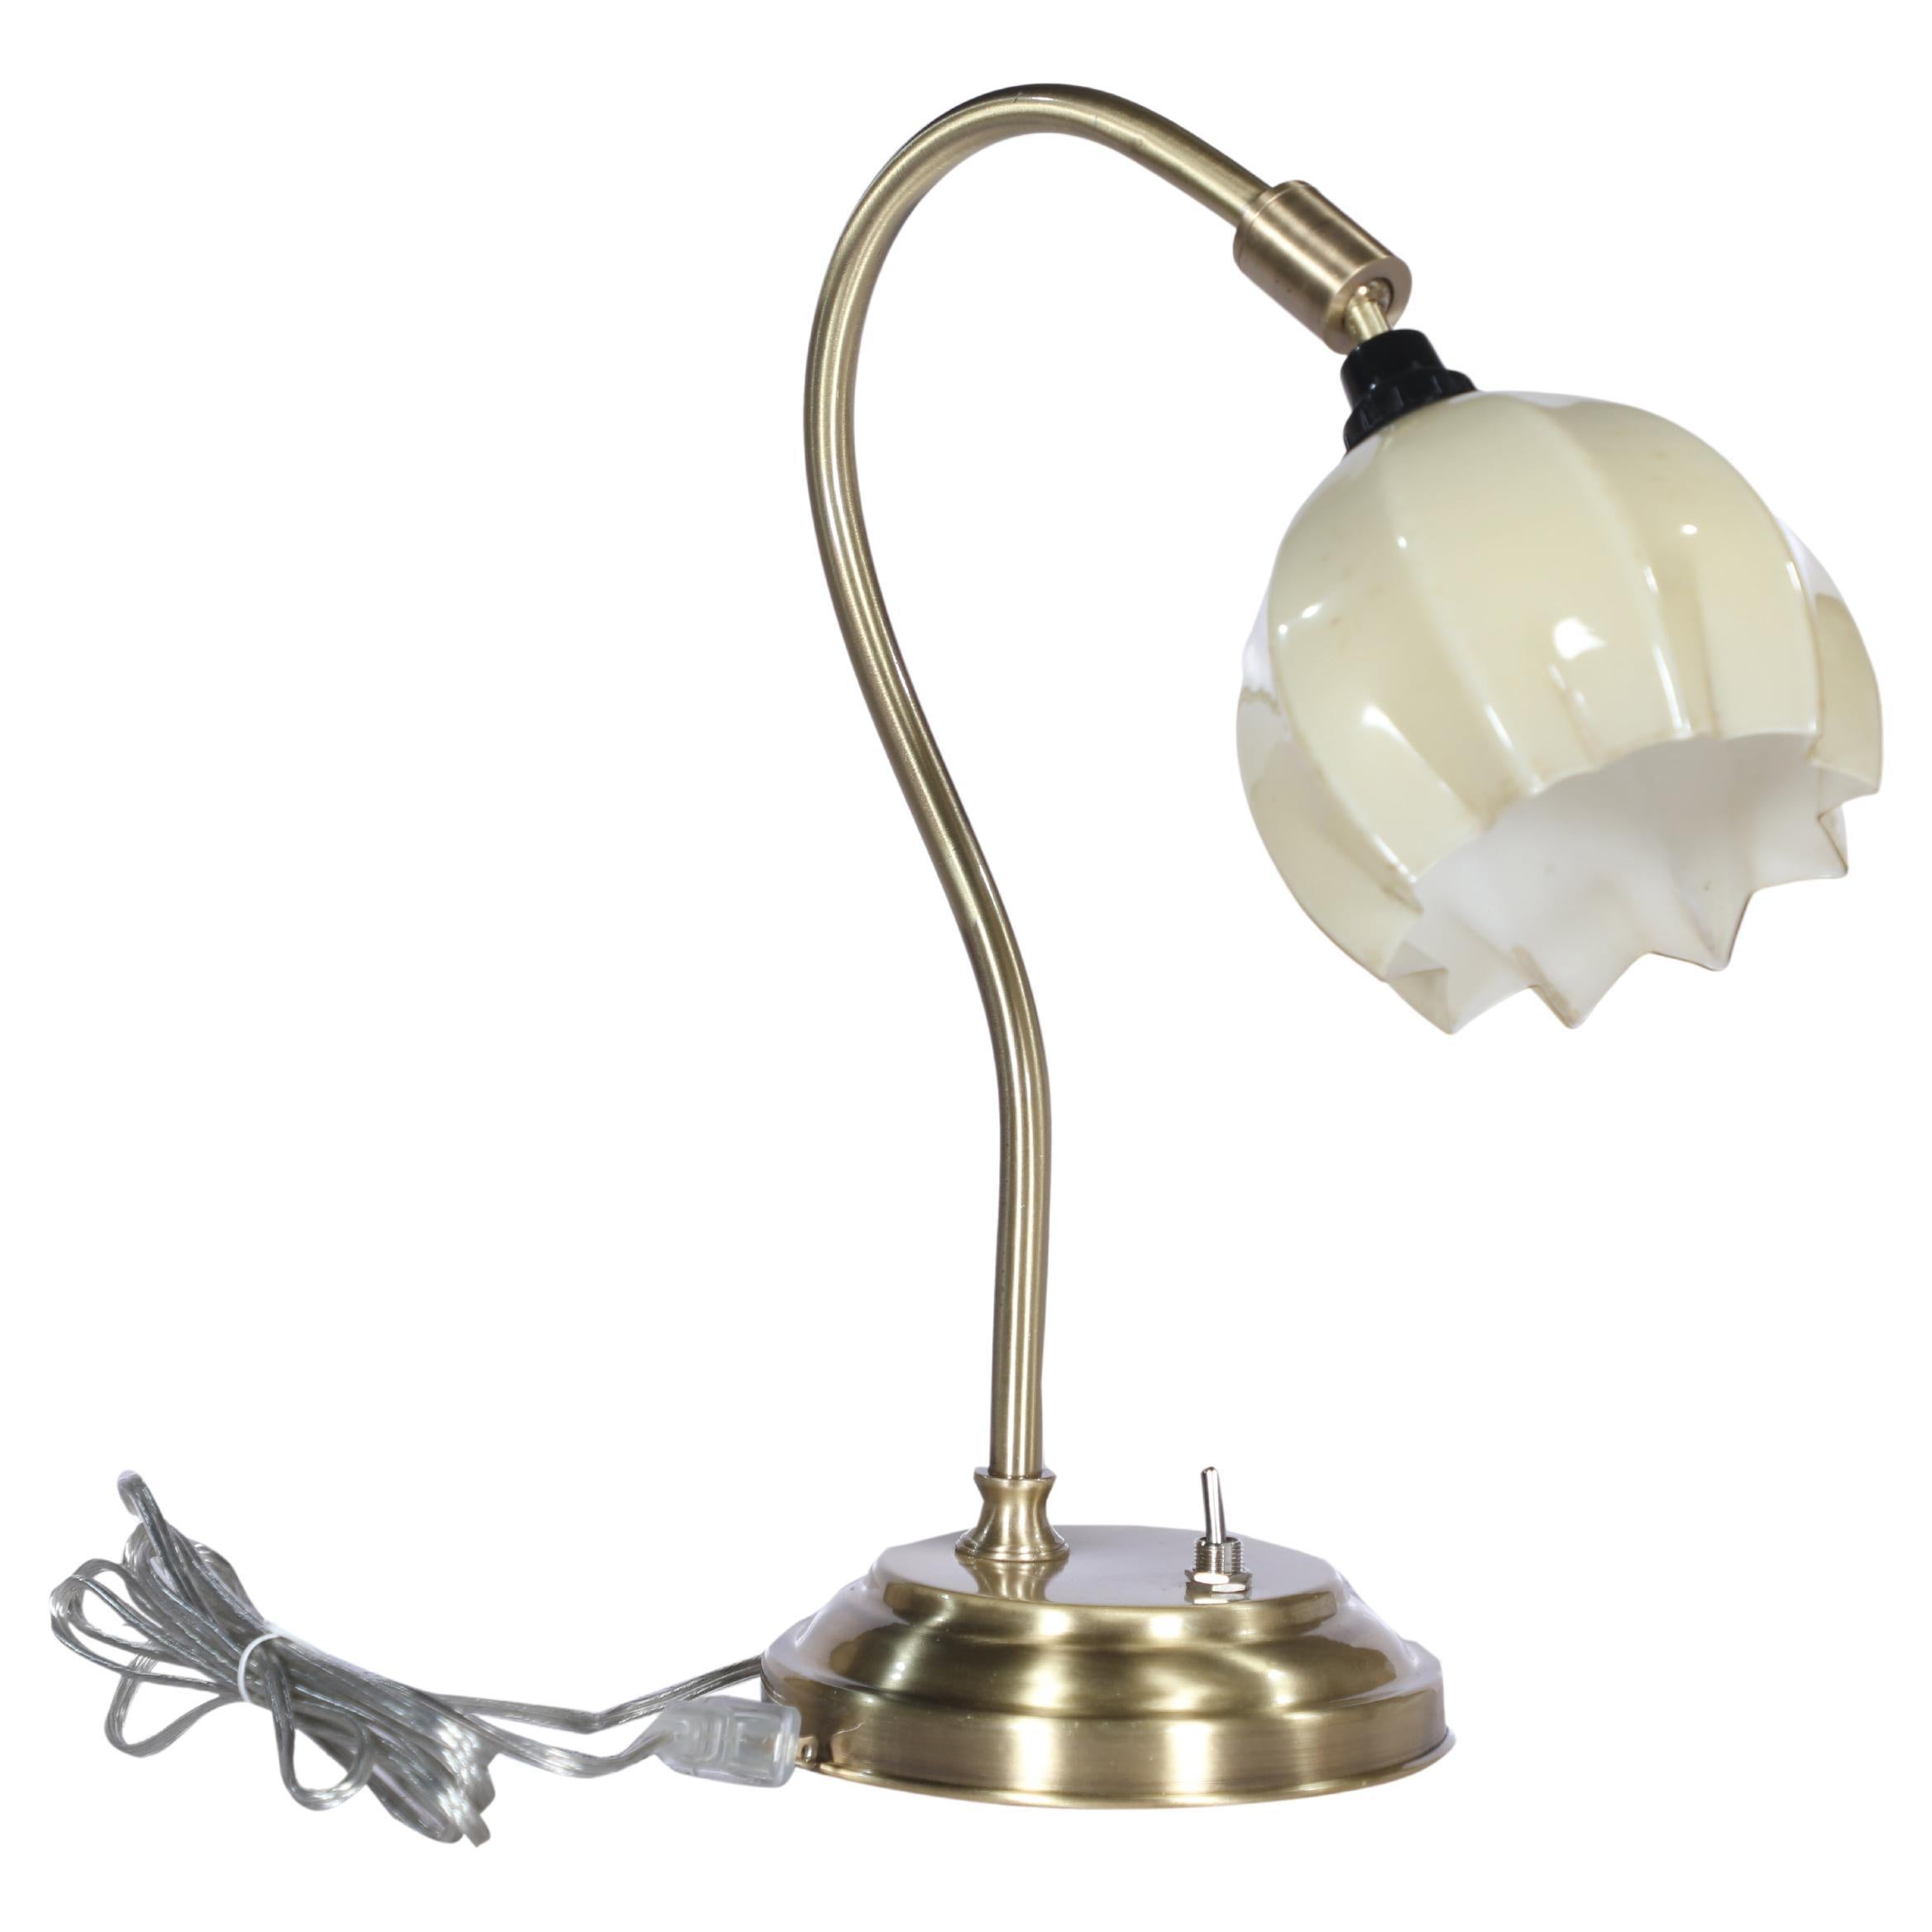 Art Deco Desk or Table Lamp with Art Glass Flower Shade